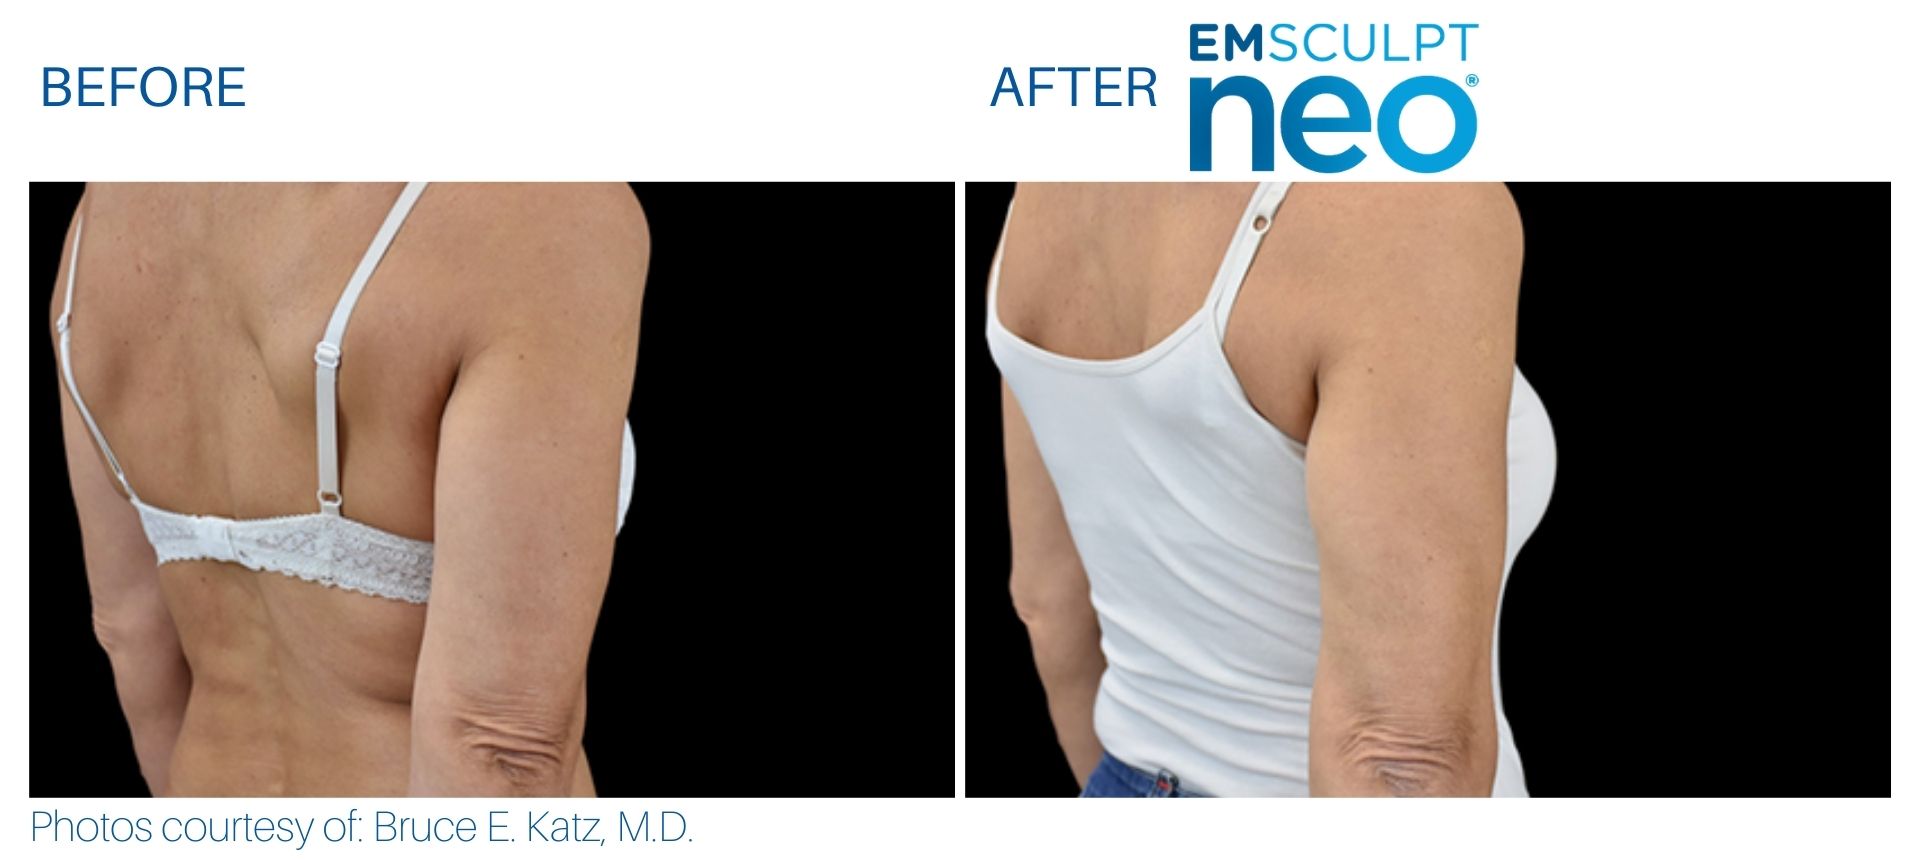 Optimum Emsculpt Neo Before And After Results On The Triceps Of A Woman'S Arms.